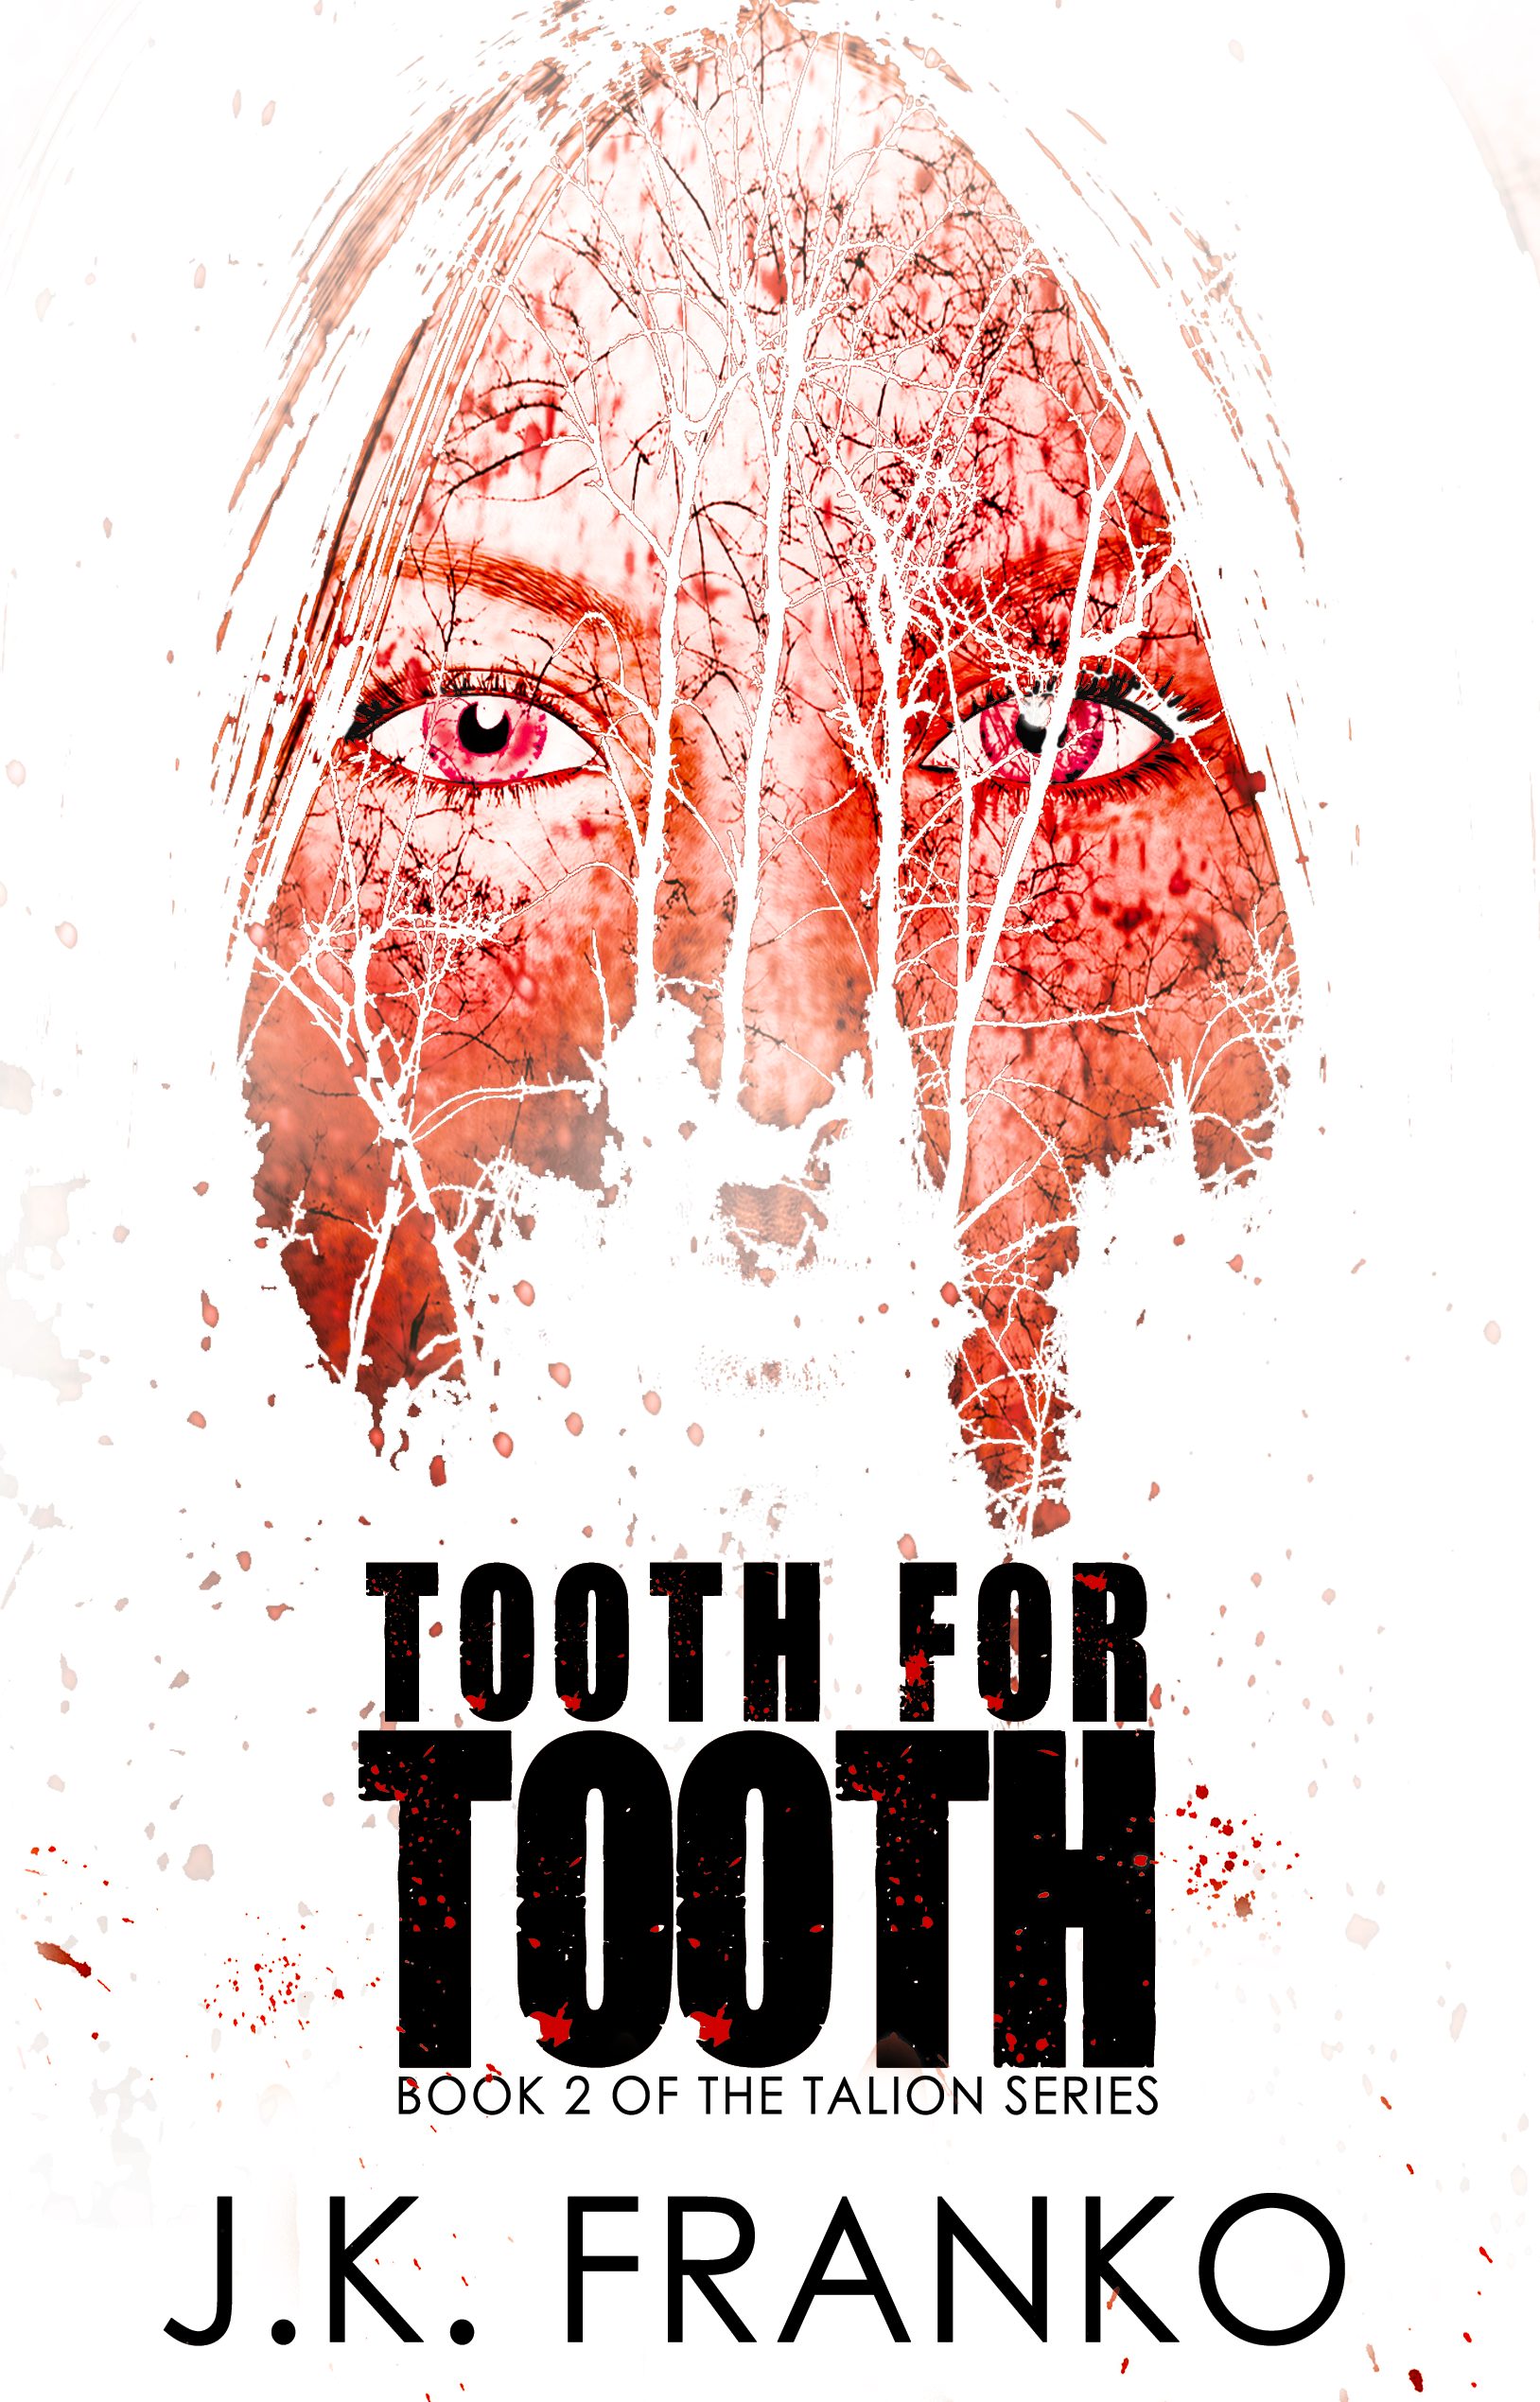 Tooth for Tooth by JK Franko